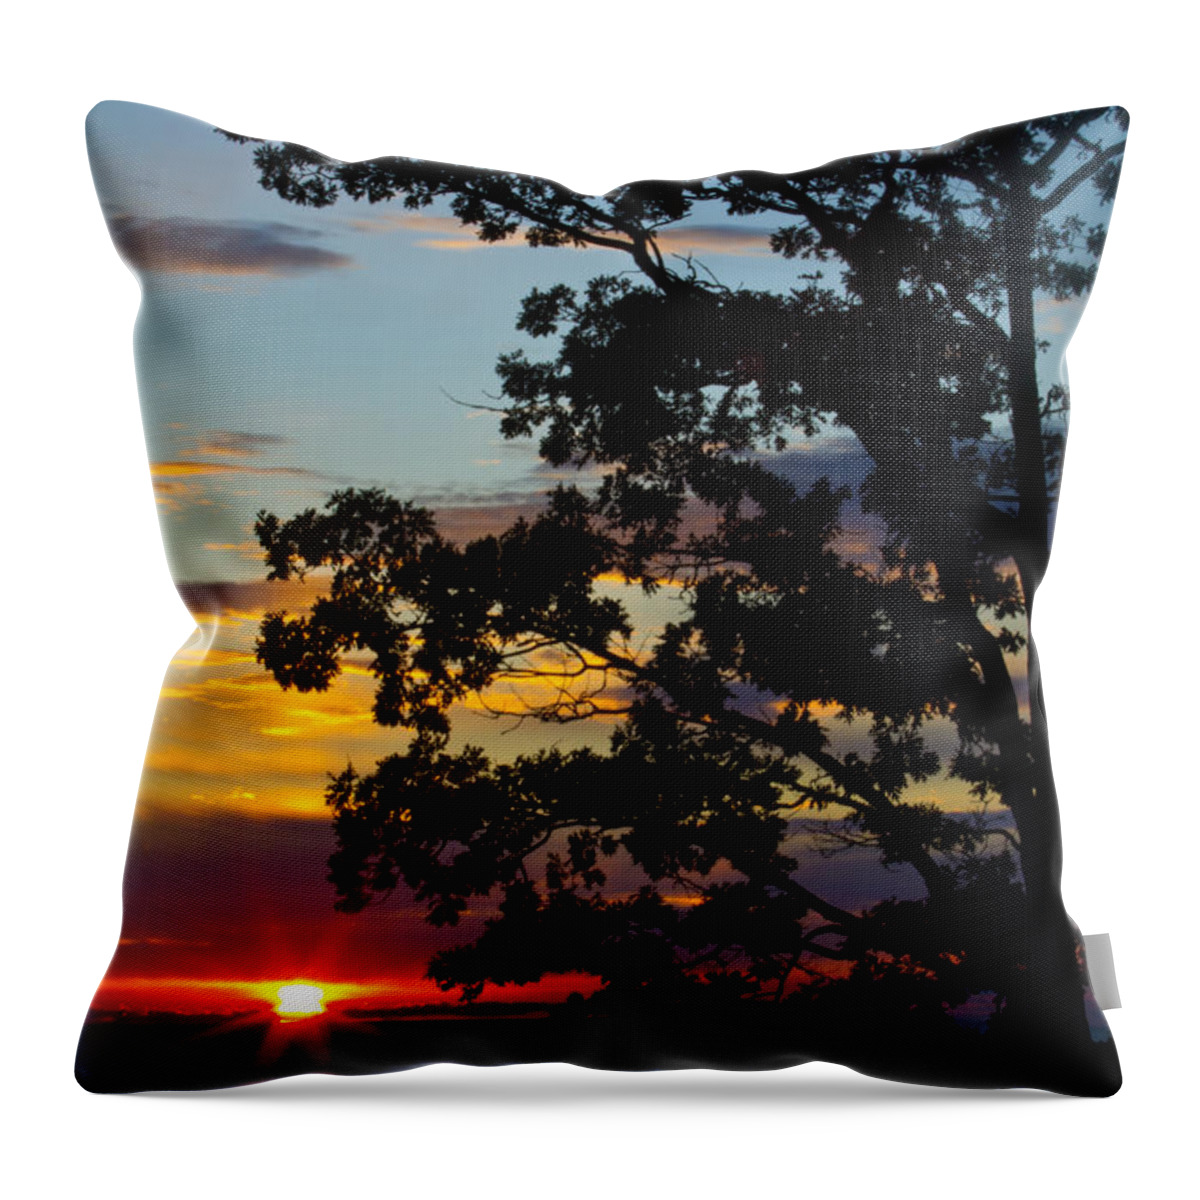 Photography Throw Pillow featuring the photograph Overlooking Lake Michigan by Frederic A Reinecke